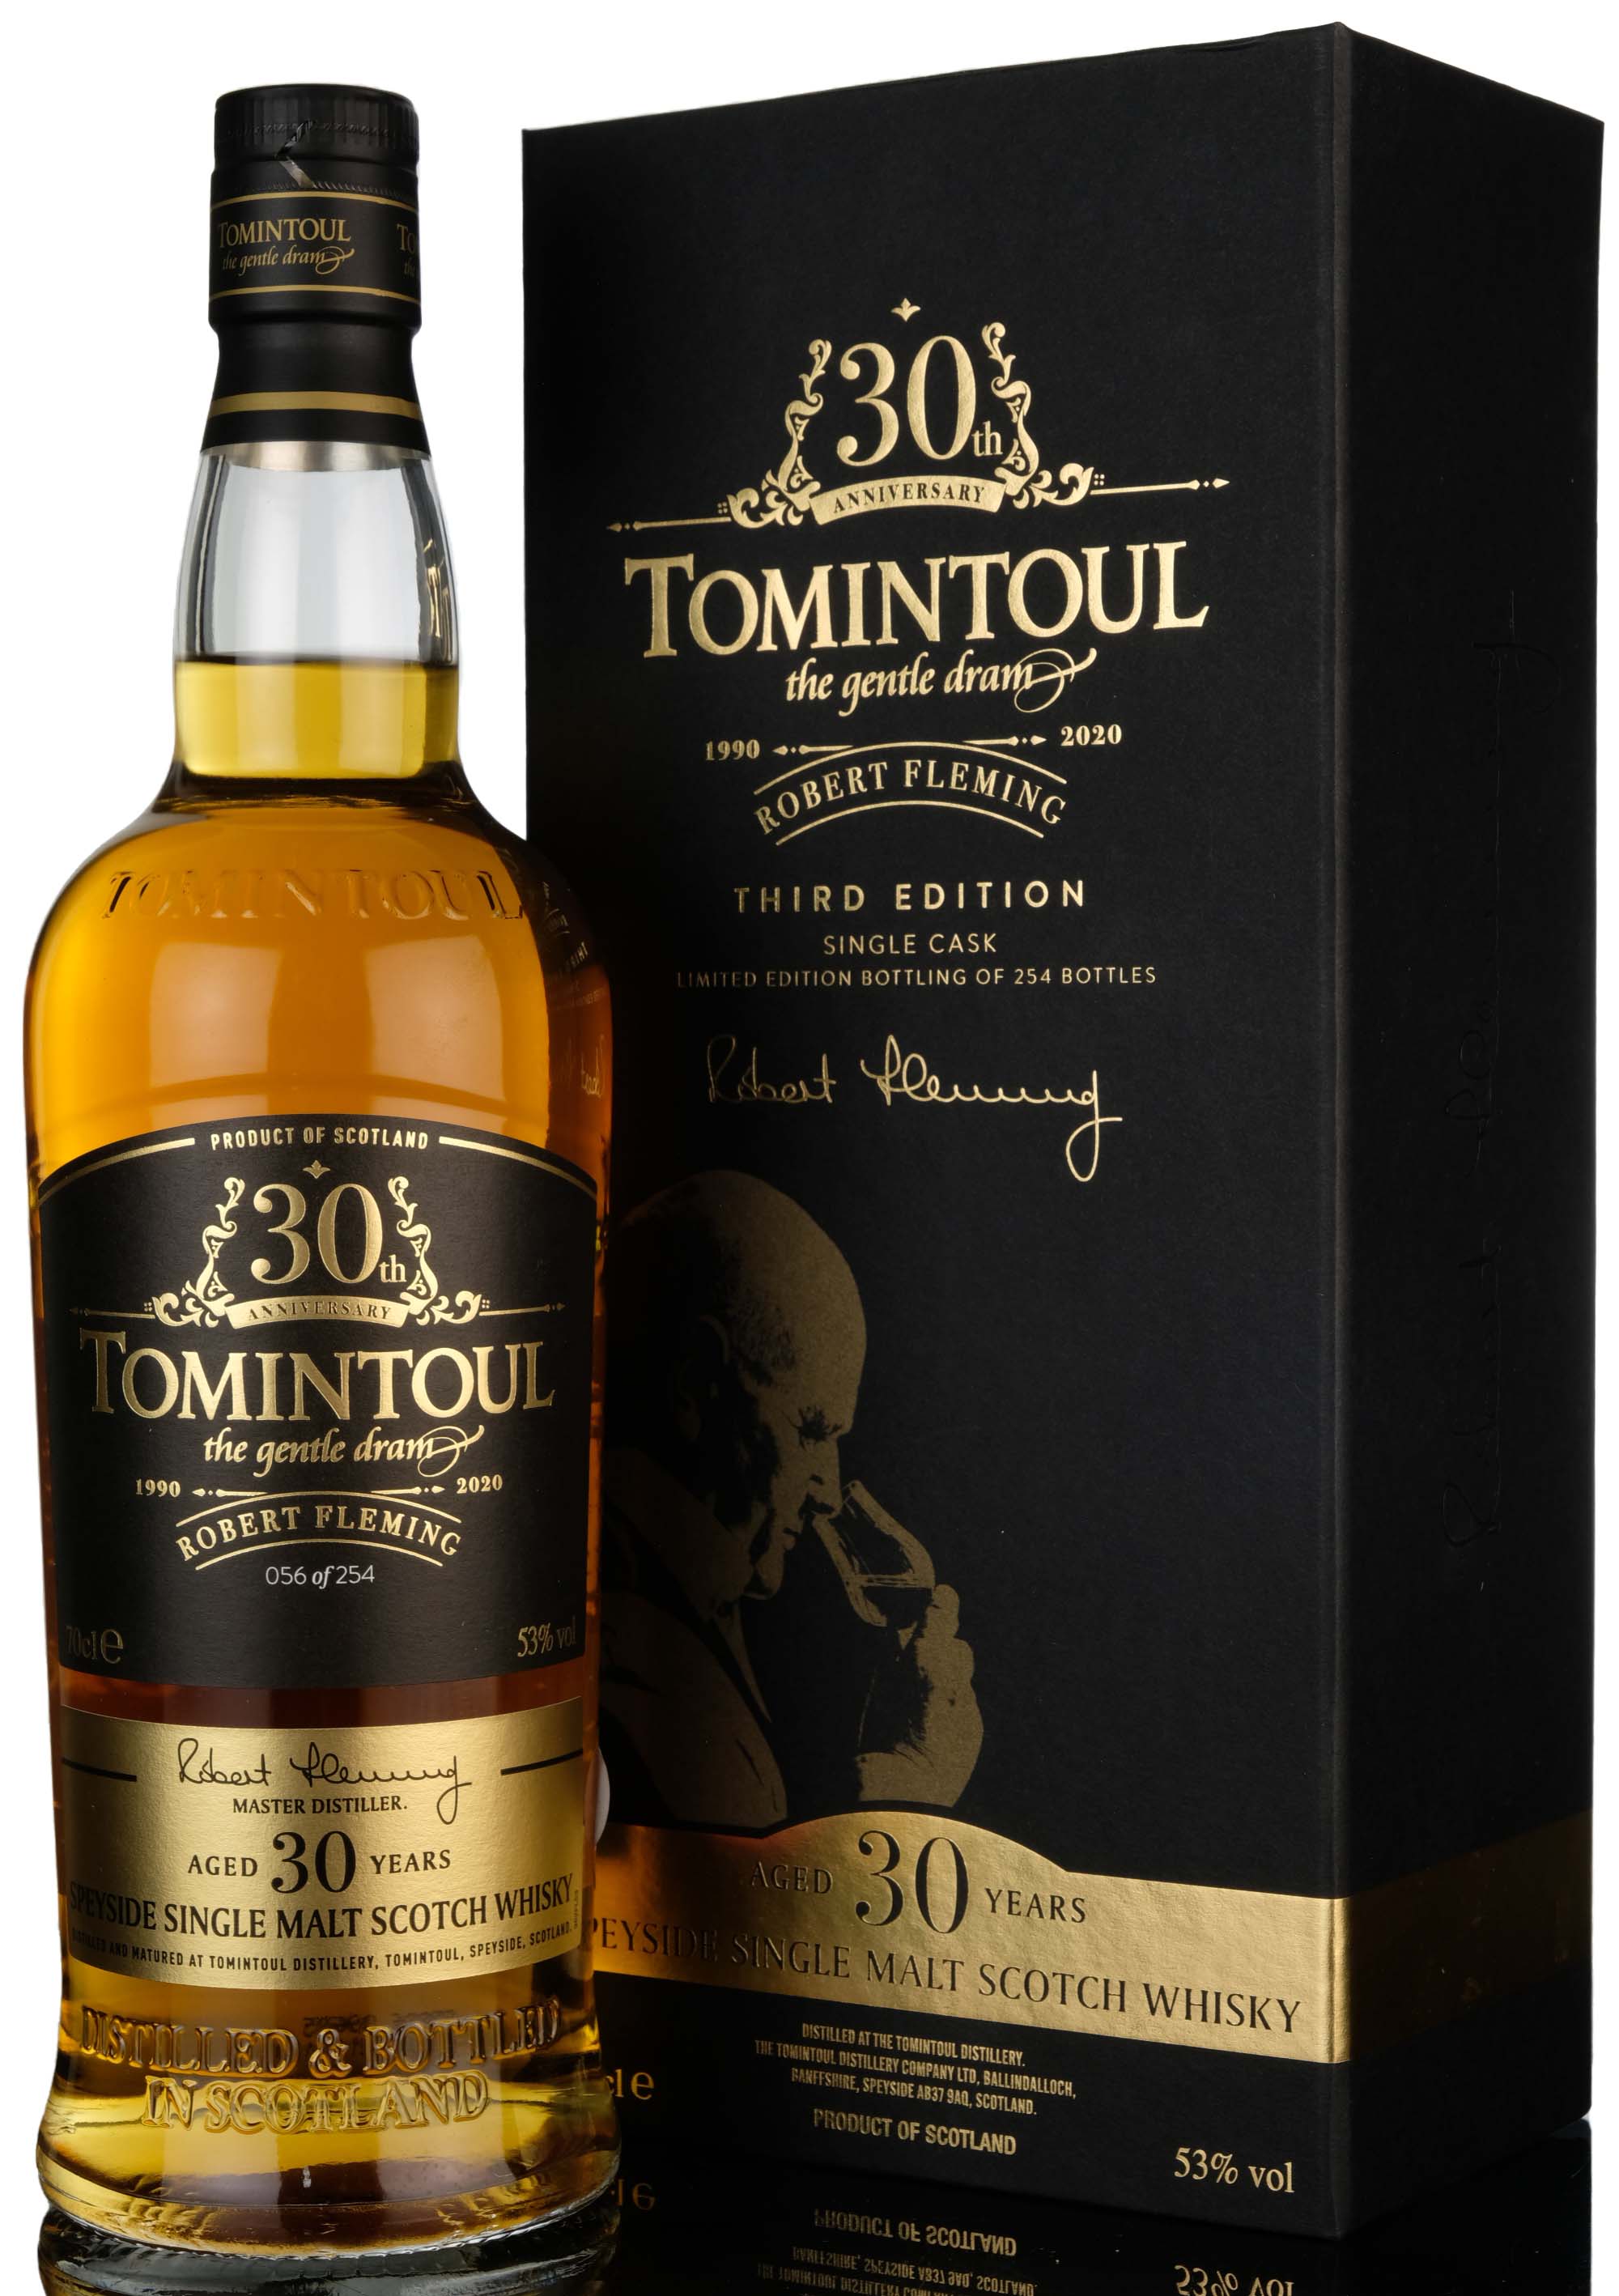 Tomintoul 1990-2021 - 30 Year Old - Robert Fleming 30th Anniversary - 3rd Edition